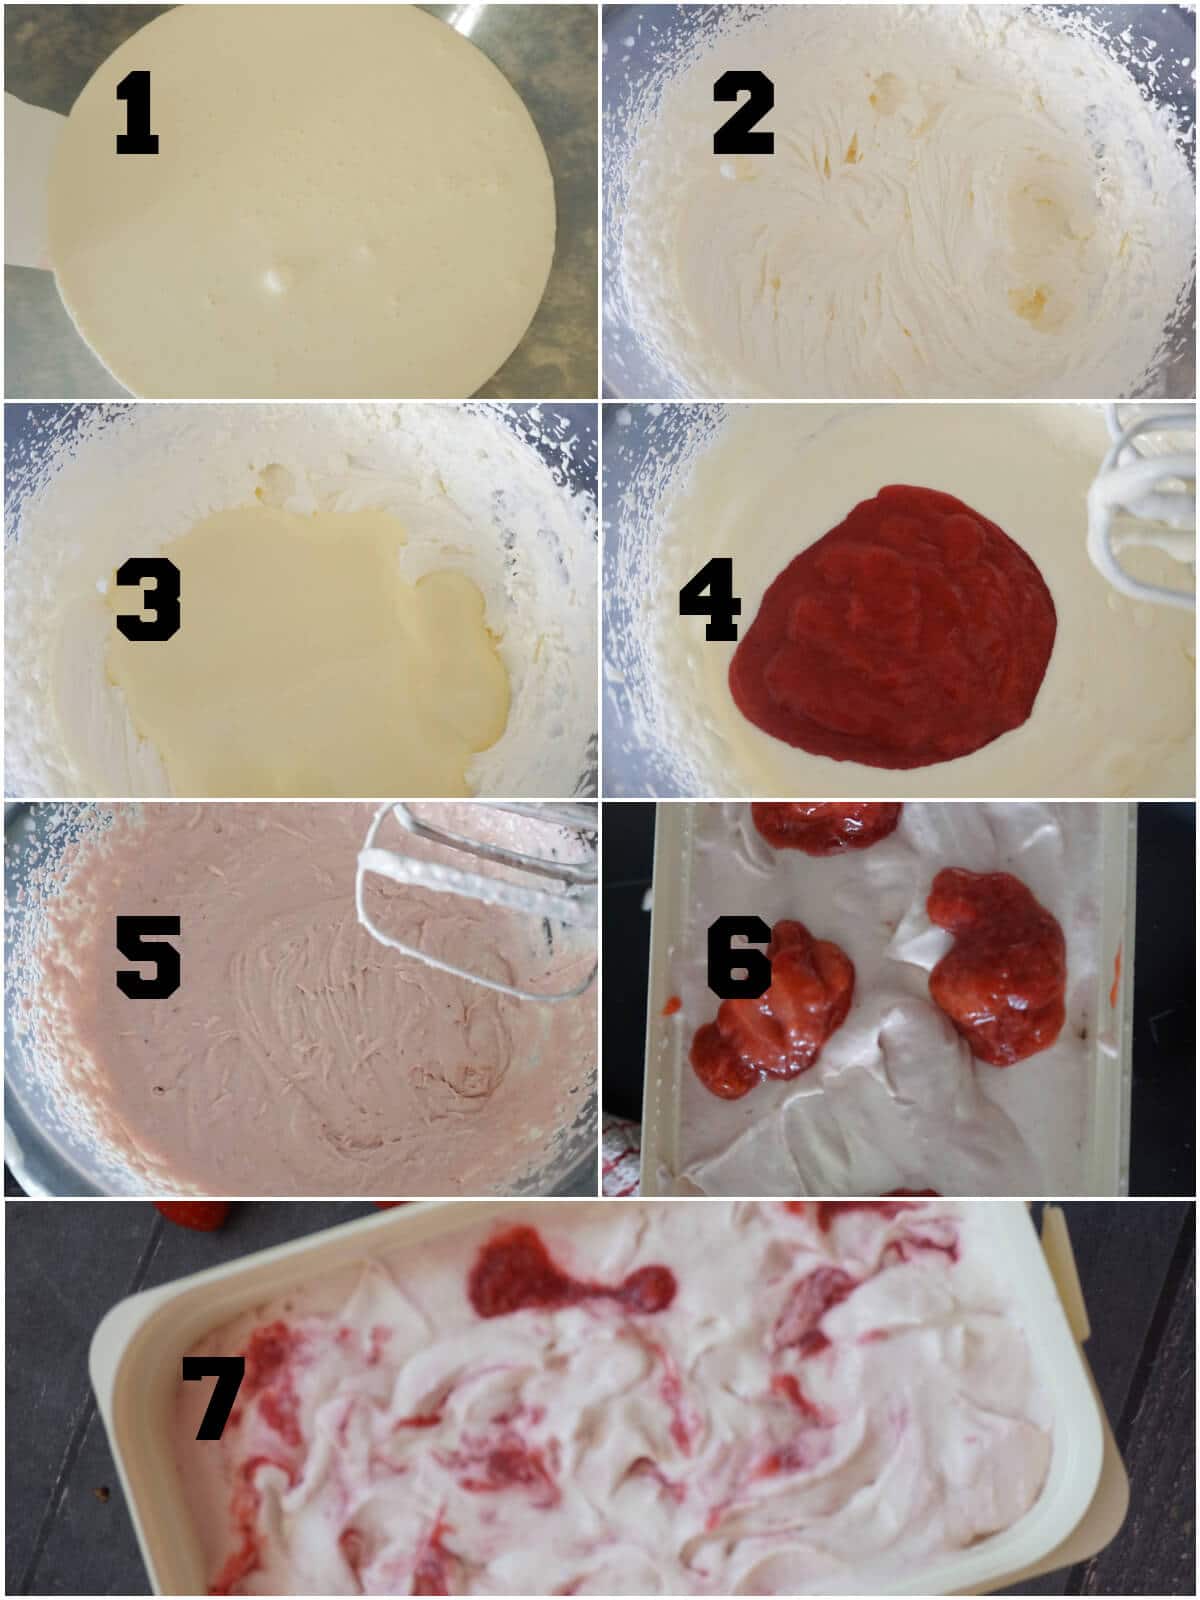 Collage of 7 photos to show how to make strawberry ripple ice cream.